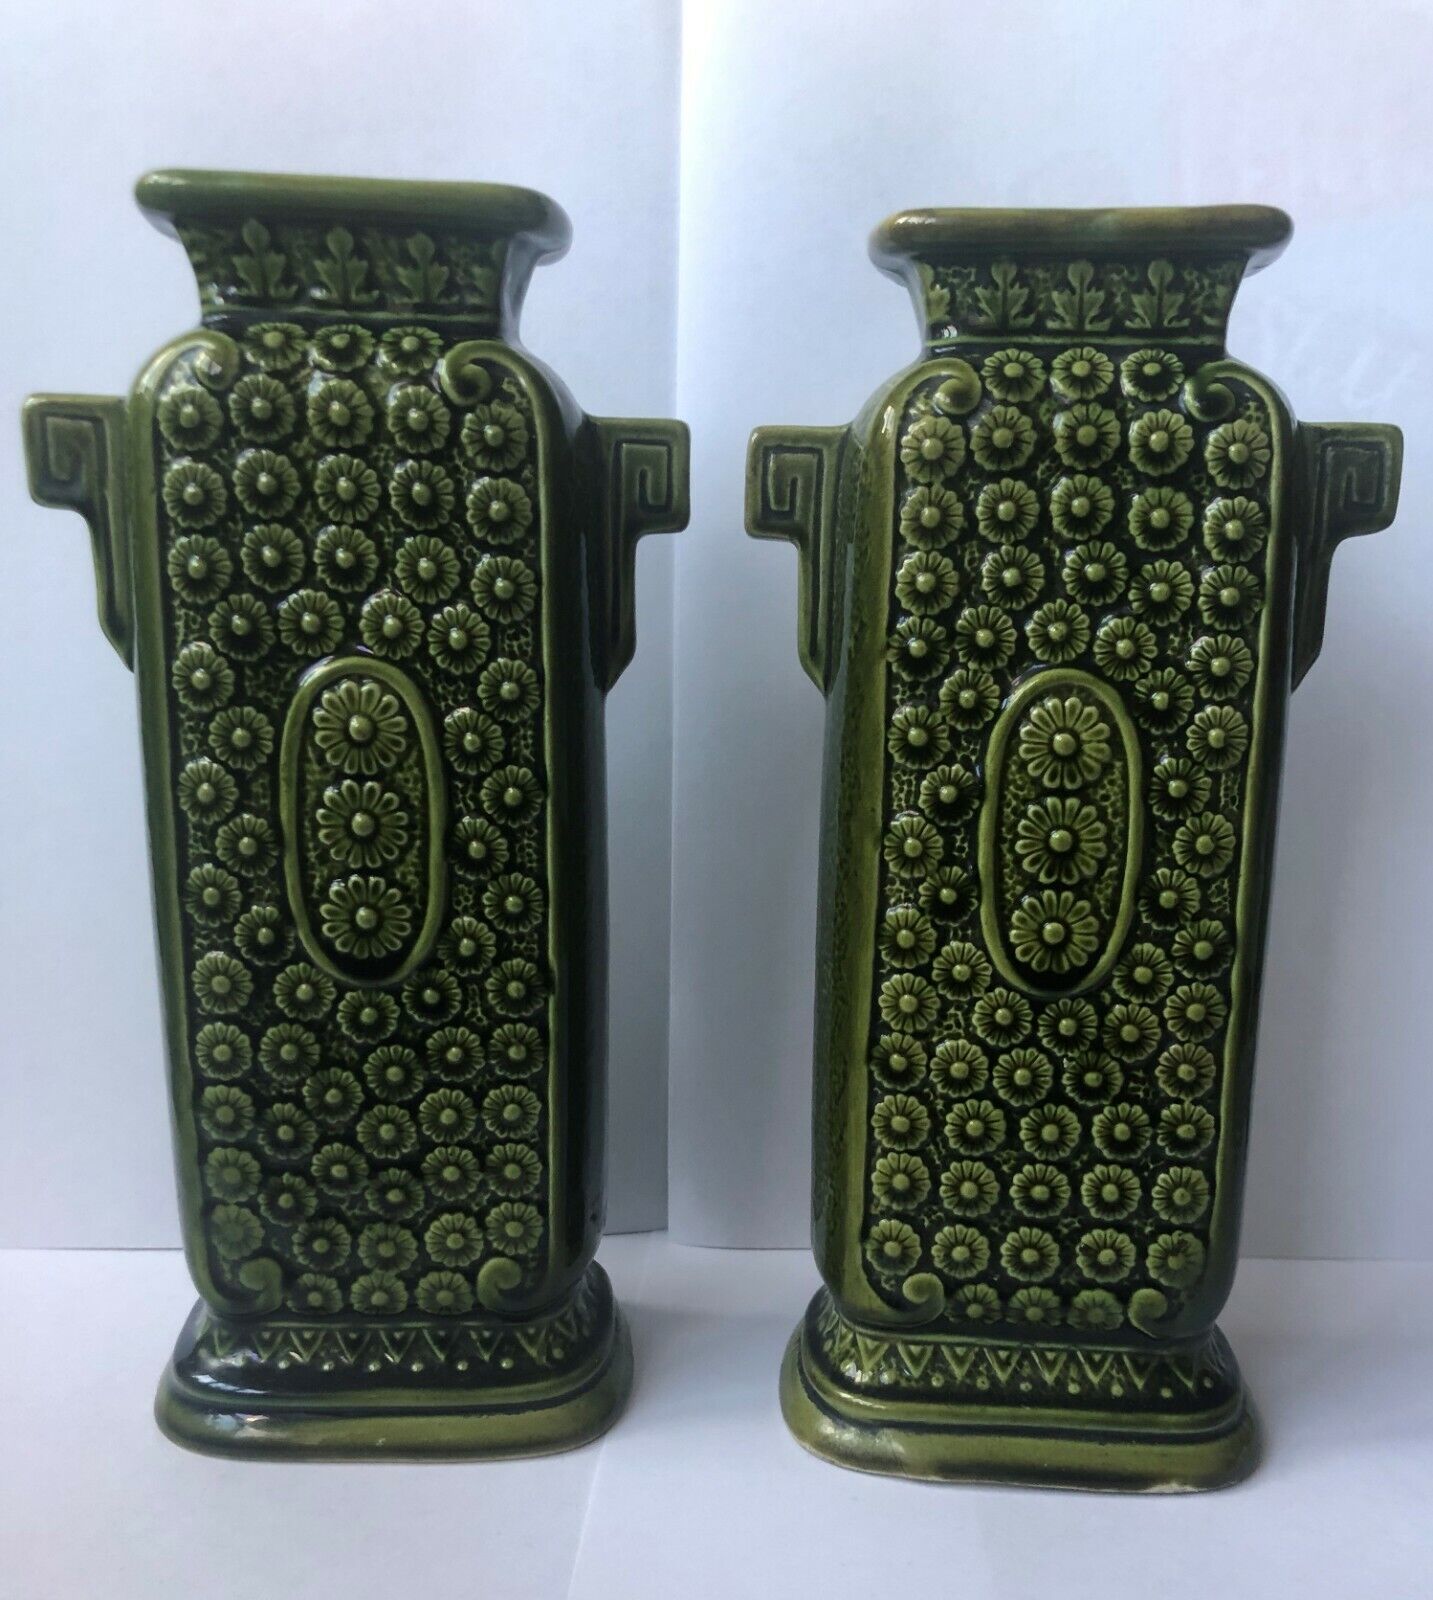 PAIR OF SAMUEL LEAR POTTERY VASES... ARTS & CRAFTS / AESTHETIC / MAJOLICA? RARE?